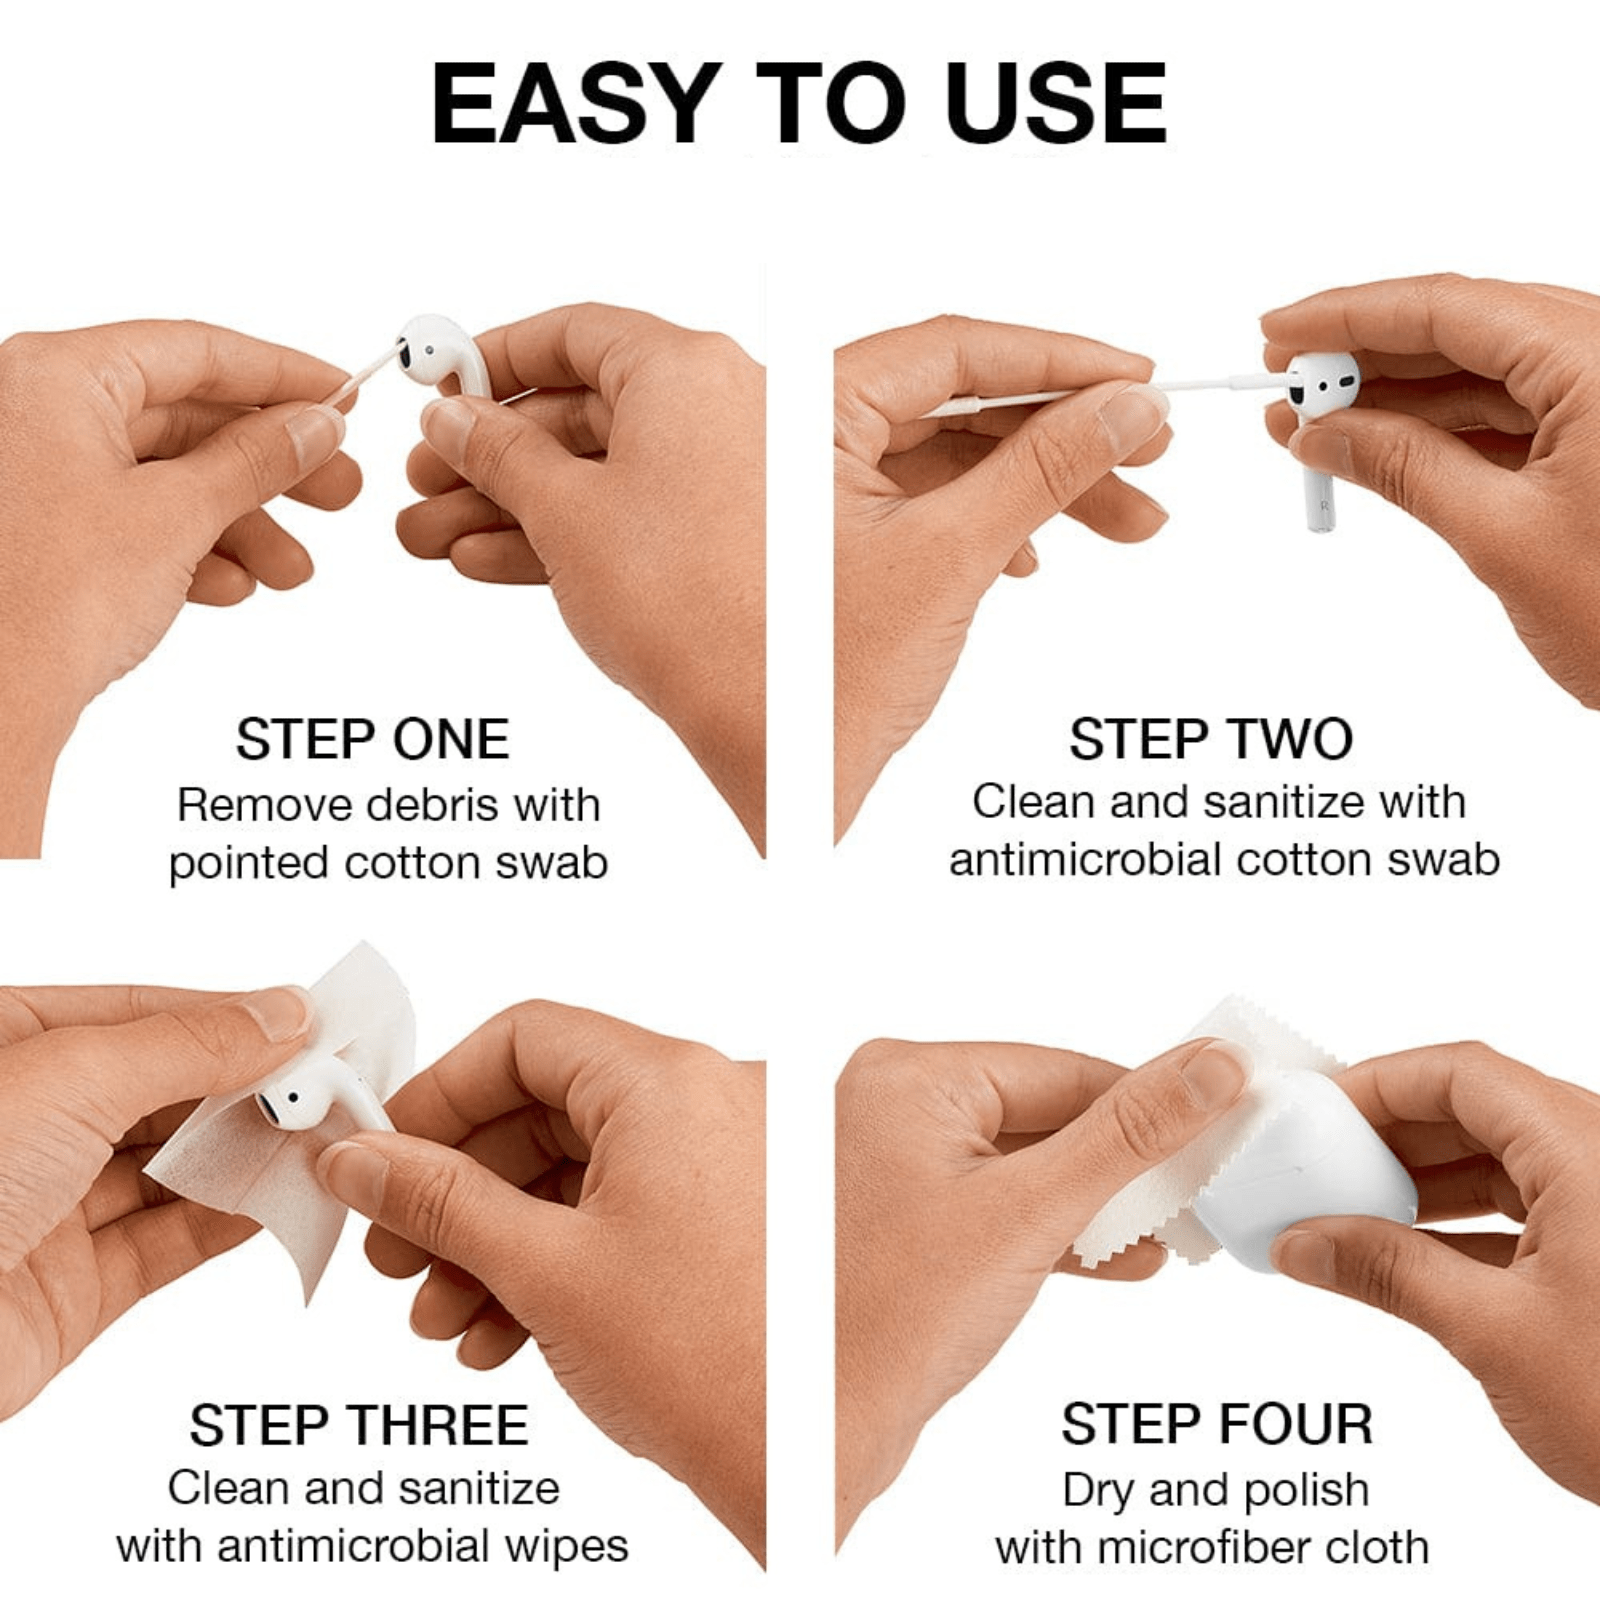 Easy to Use: step one. remove debris with pointed cotton swab. step two. clean and sanitize with antimicrobial cotton swab. step three. clean and sanitize with antimicrobial wipes. step 4. dry and polish with microfiber cloth.